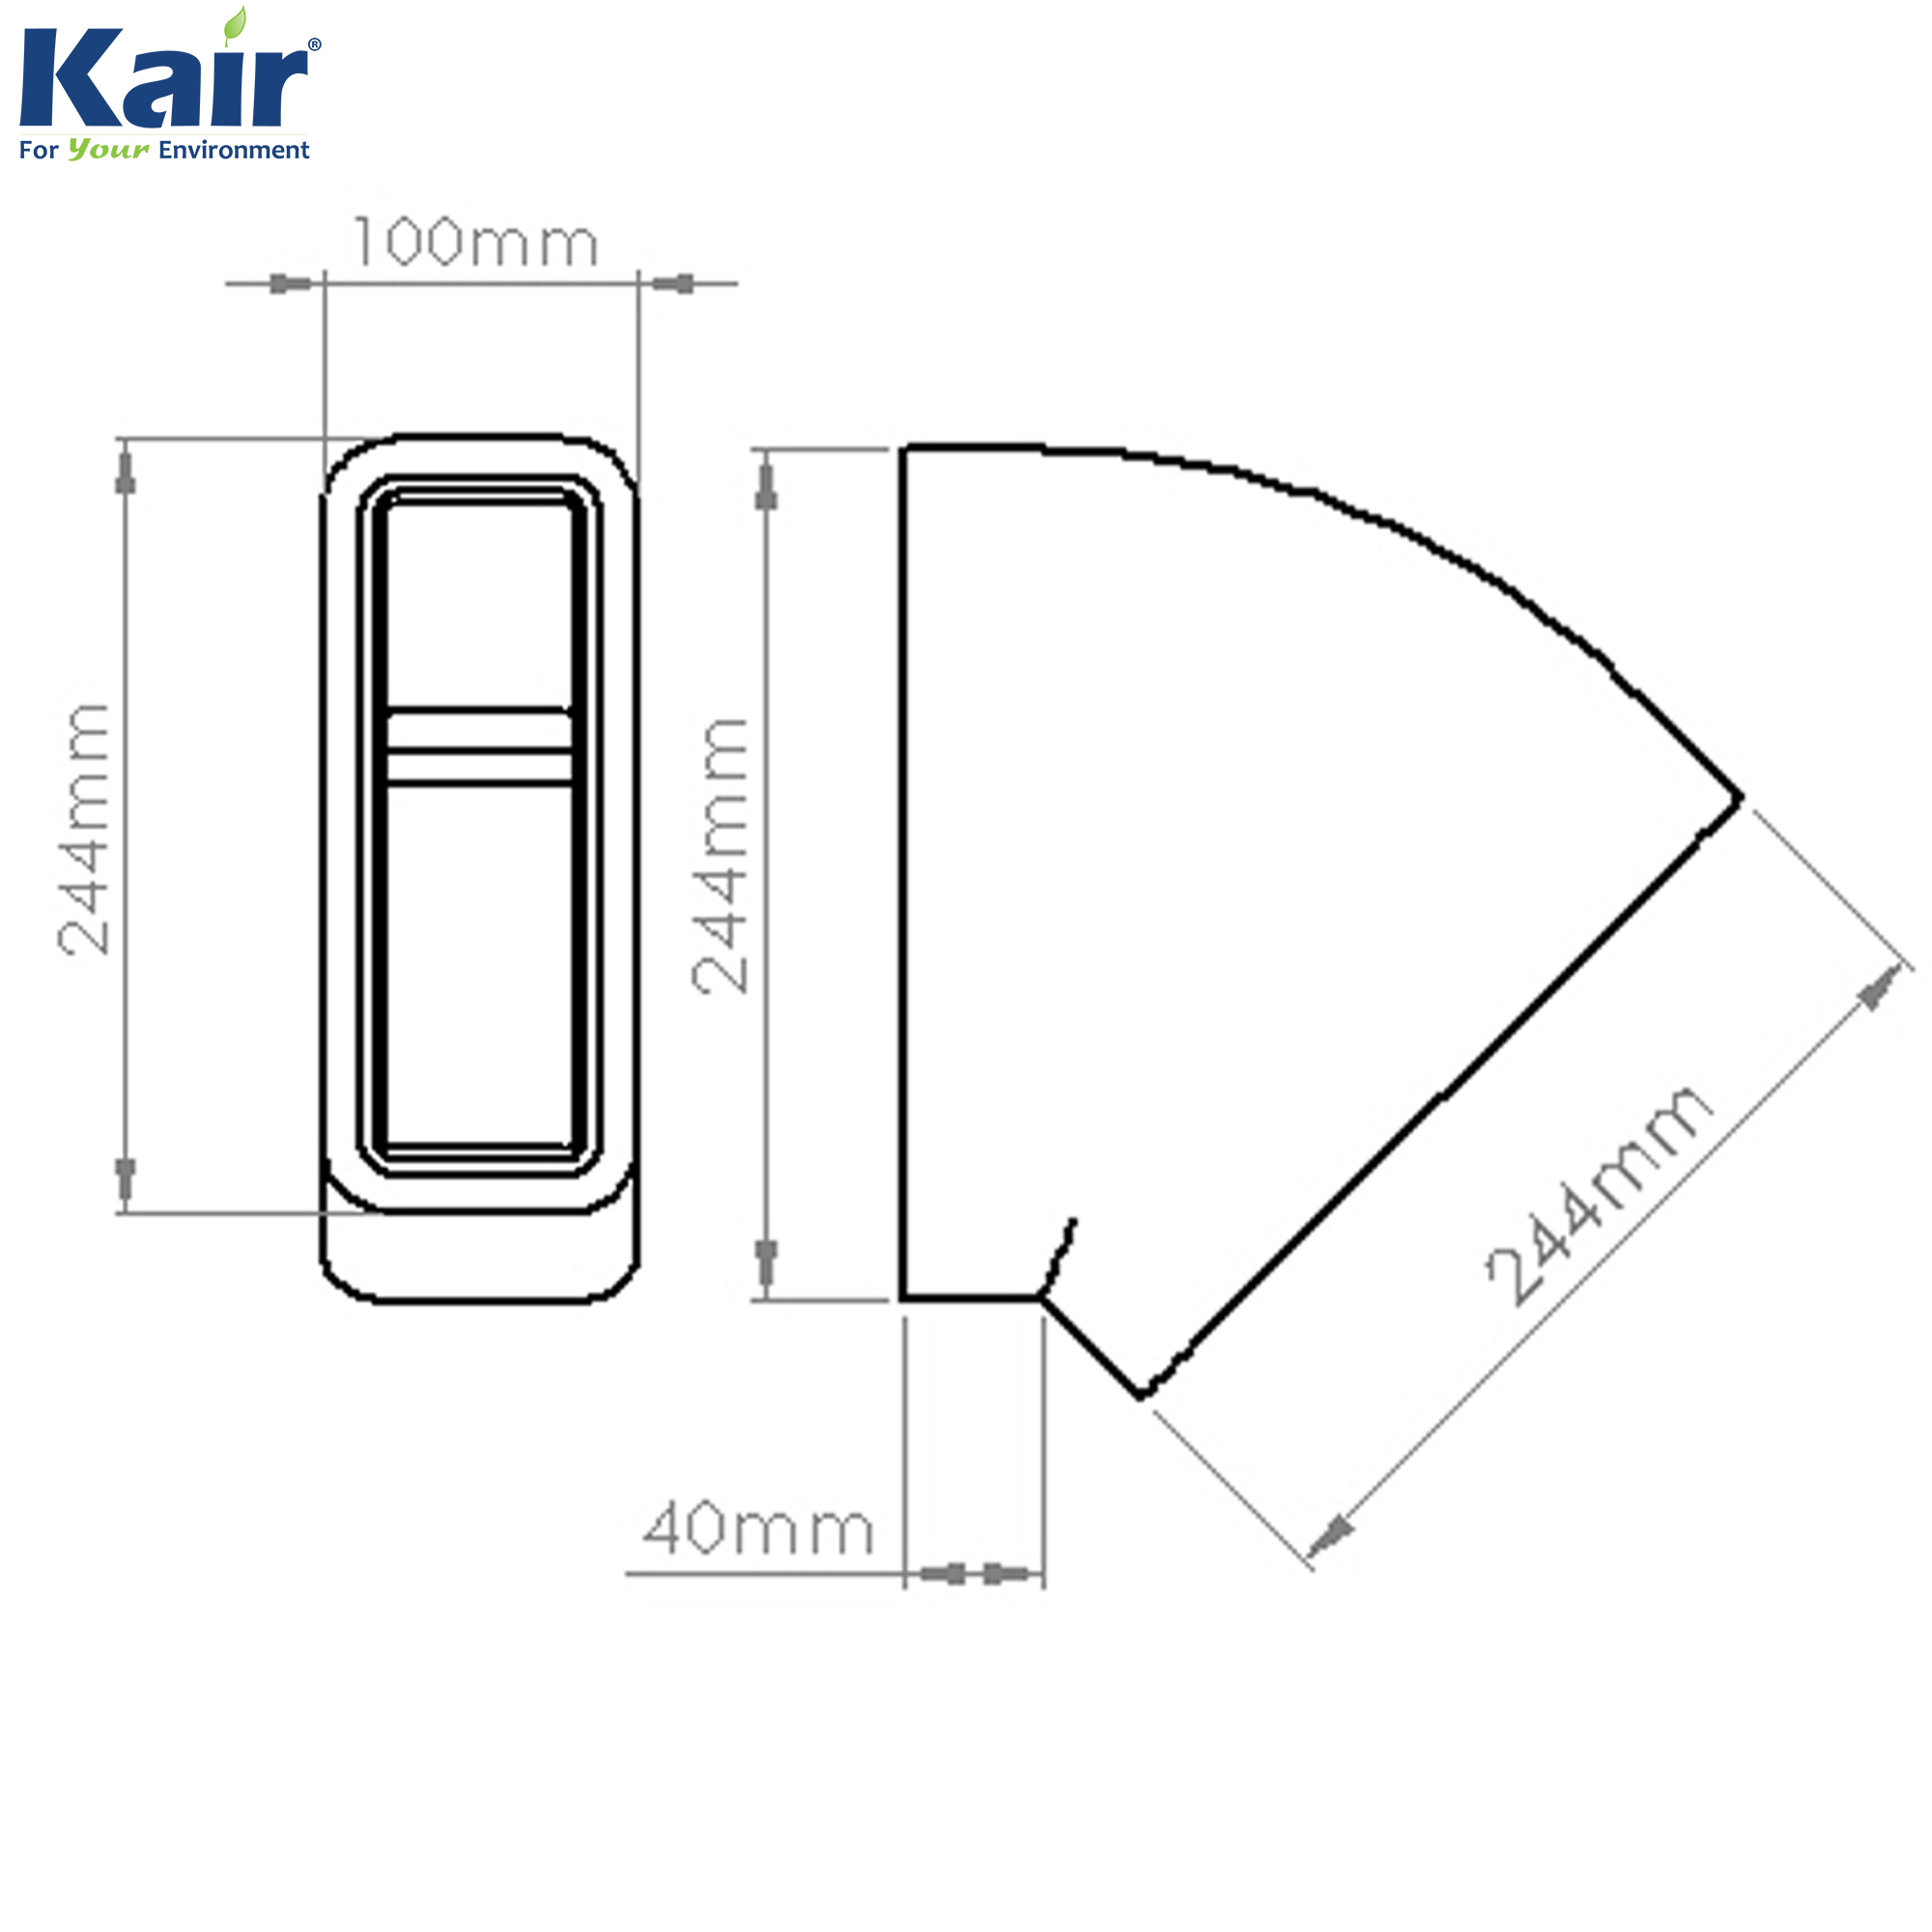 Box of 6 x Kair Self-Seal Thermal Ducting 204X60mm Horizontal 45 Degree Bends Complete With Female Click And Lock Fittings